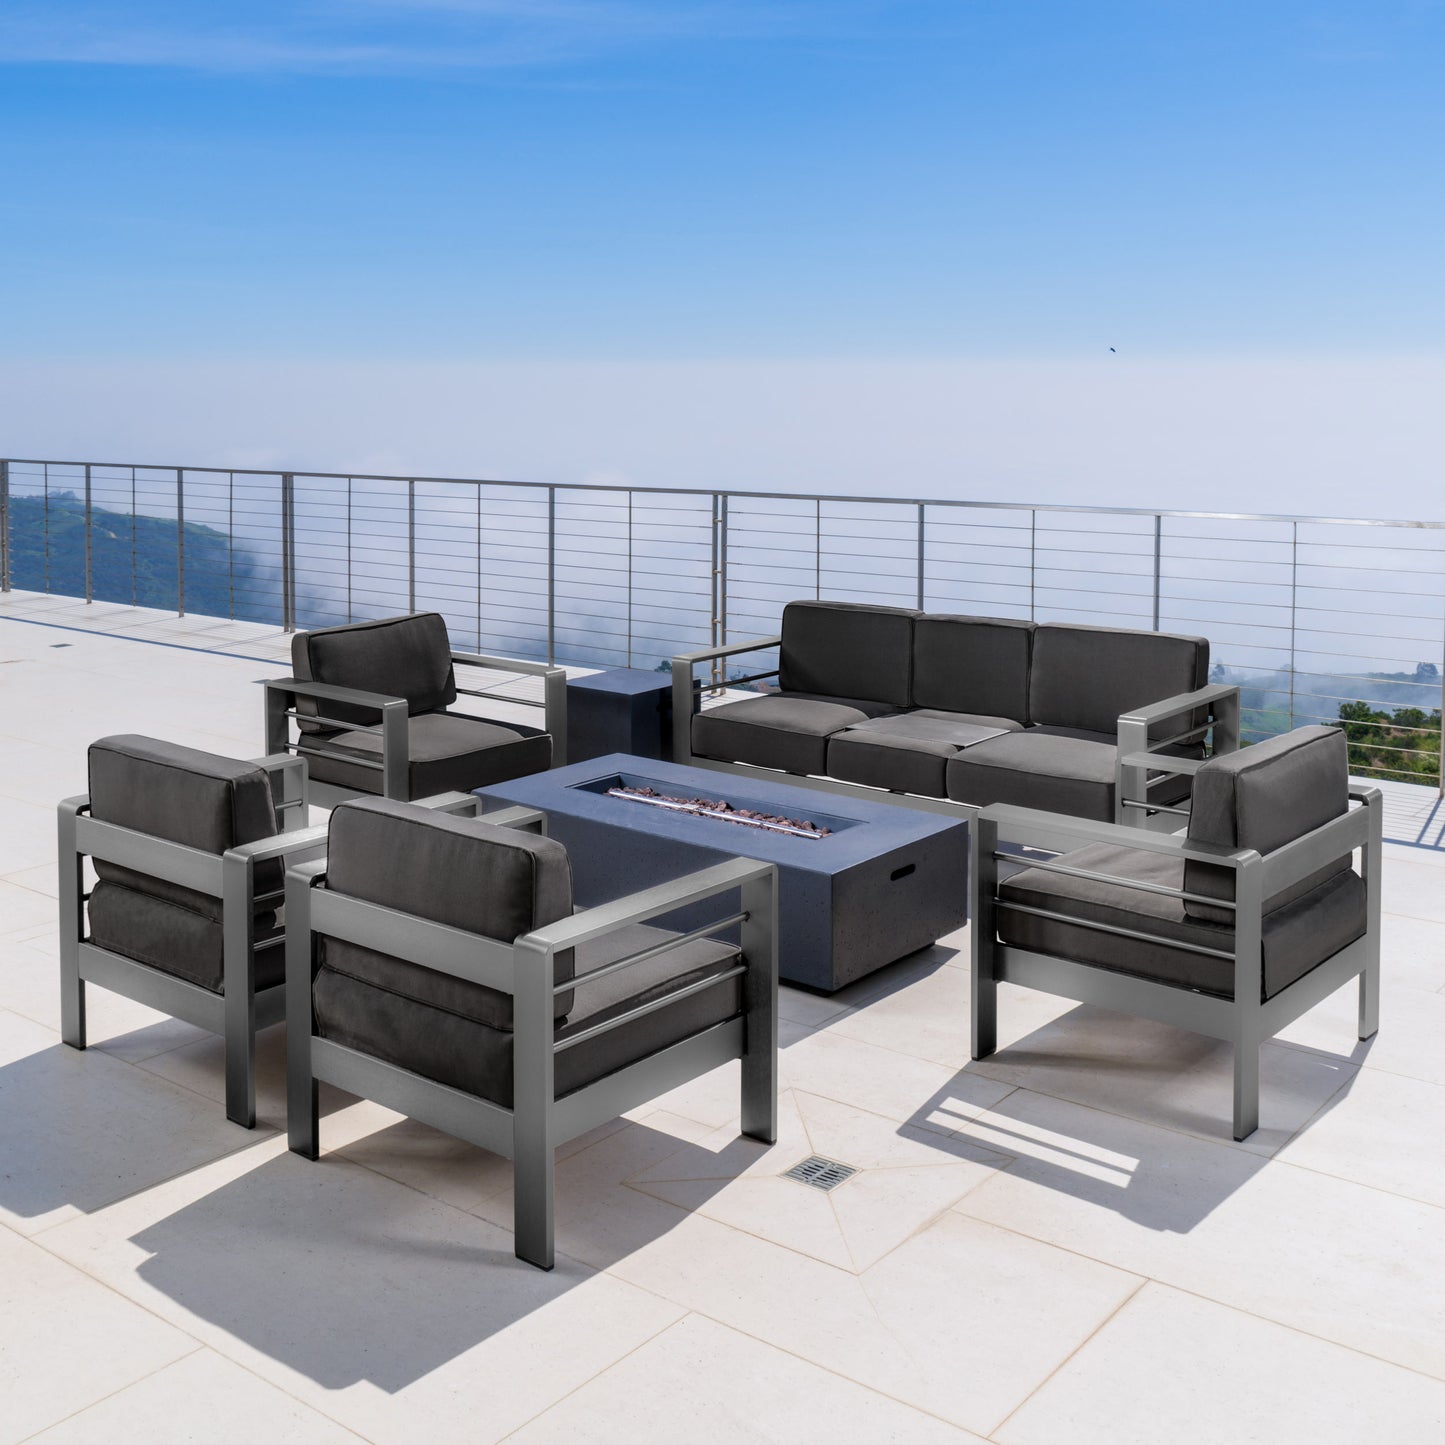 Coral Bay Outdoor Gray Aluminum 7 Piece Sofa Chat Set with Fire Table